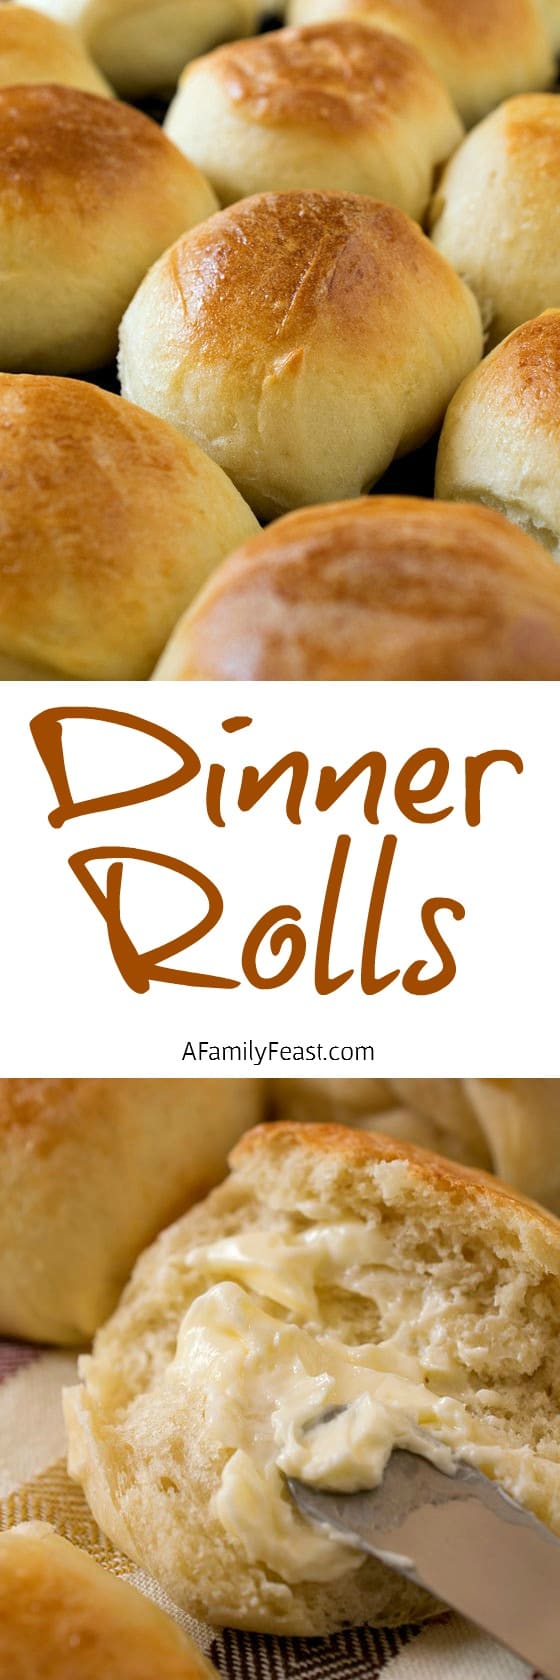 These Dinner Rolls are super easy to make and delicious! This recipe is also super versatile - add sesame seeds or poppy seeds to change things up!